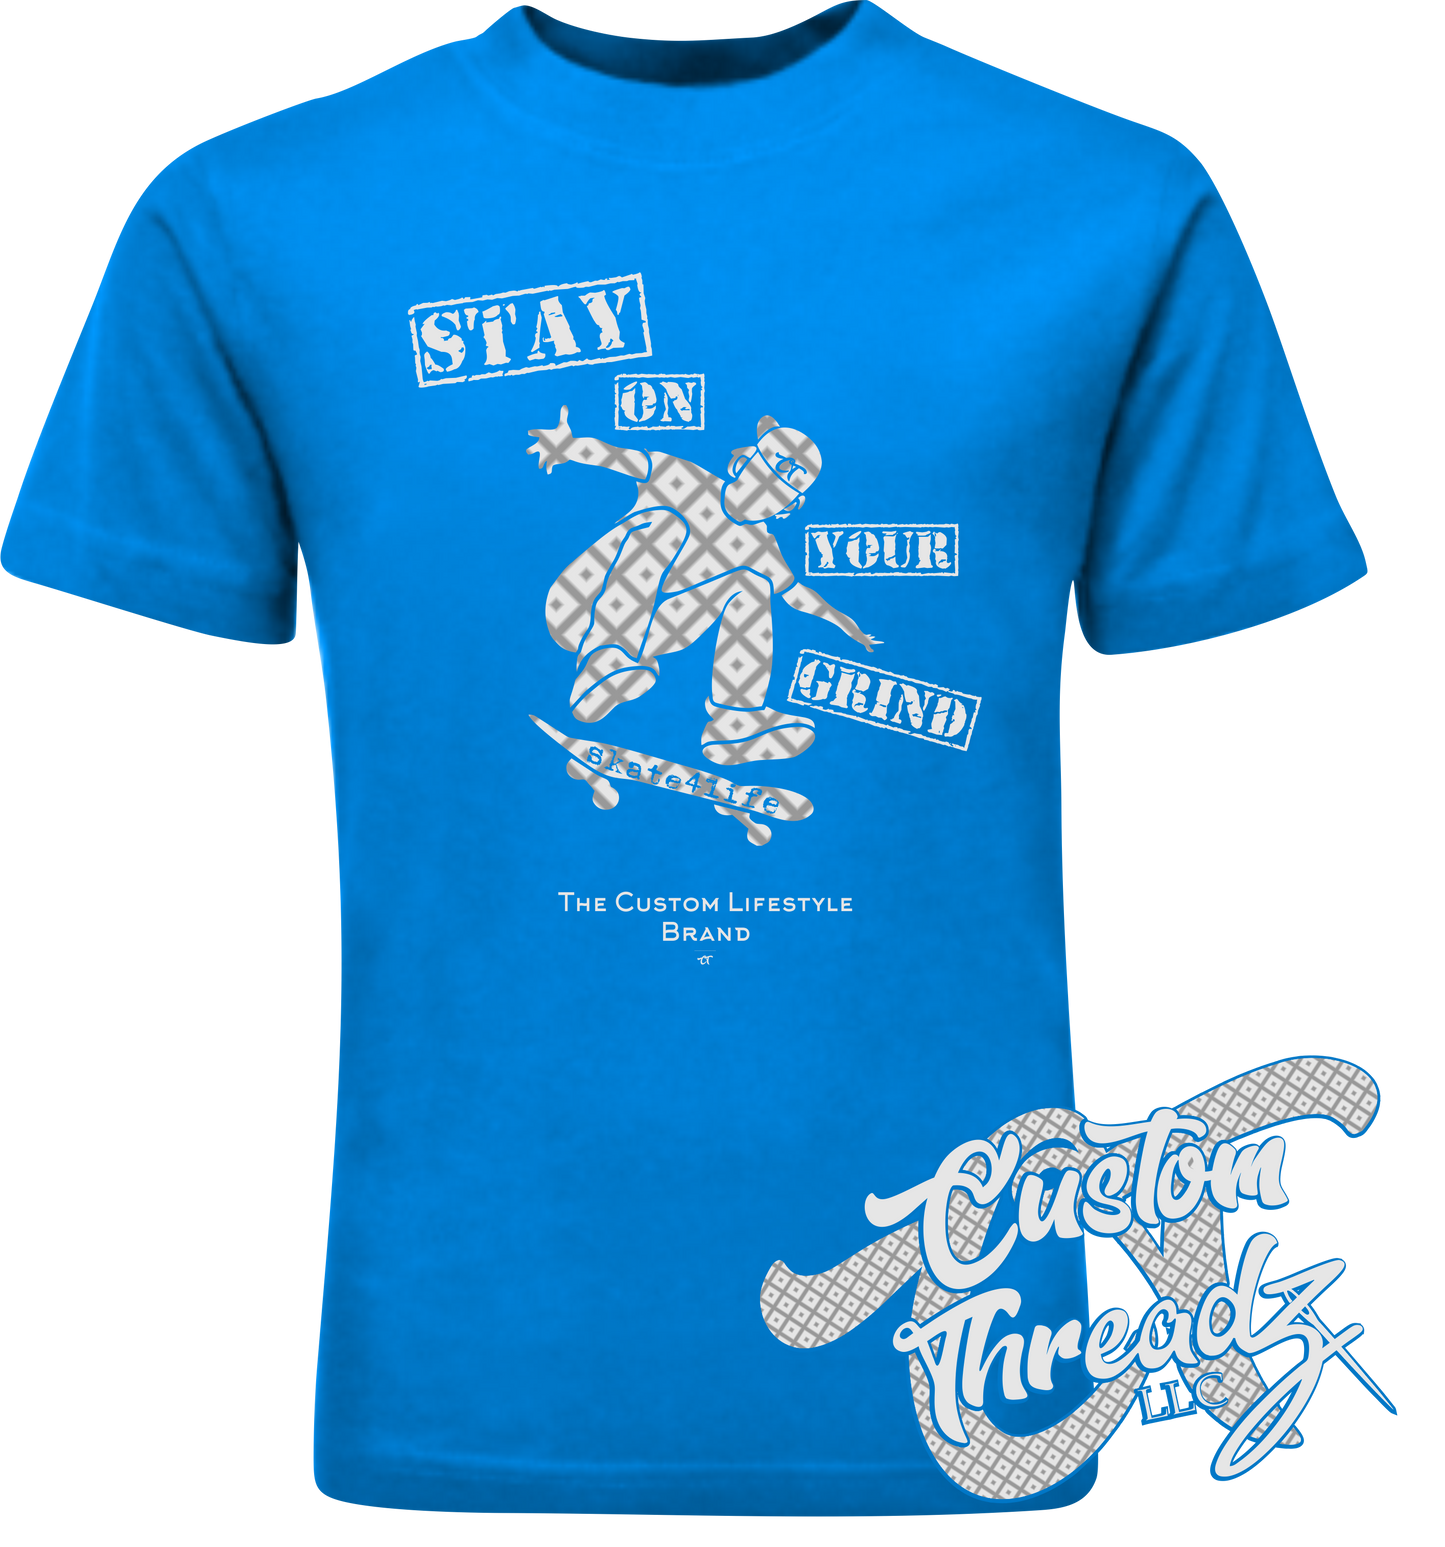 sapphire cotton t-shirt stay on your grind skate